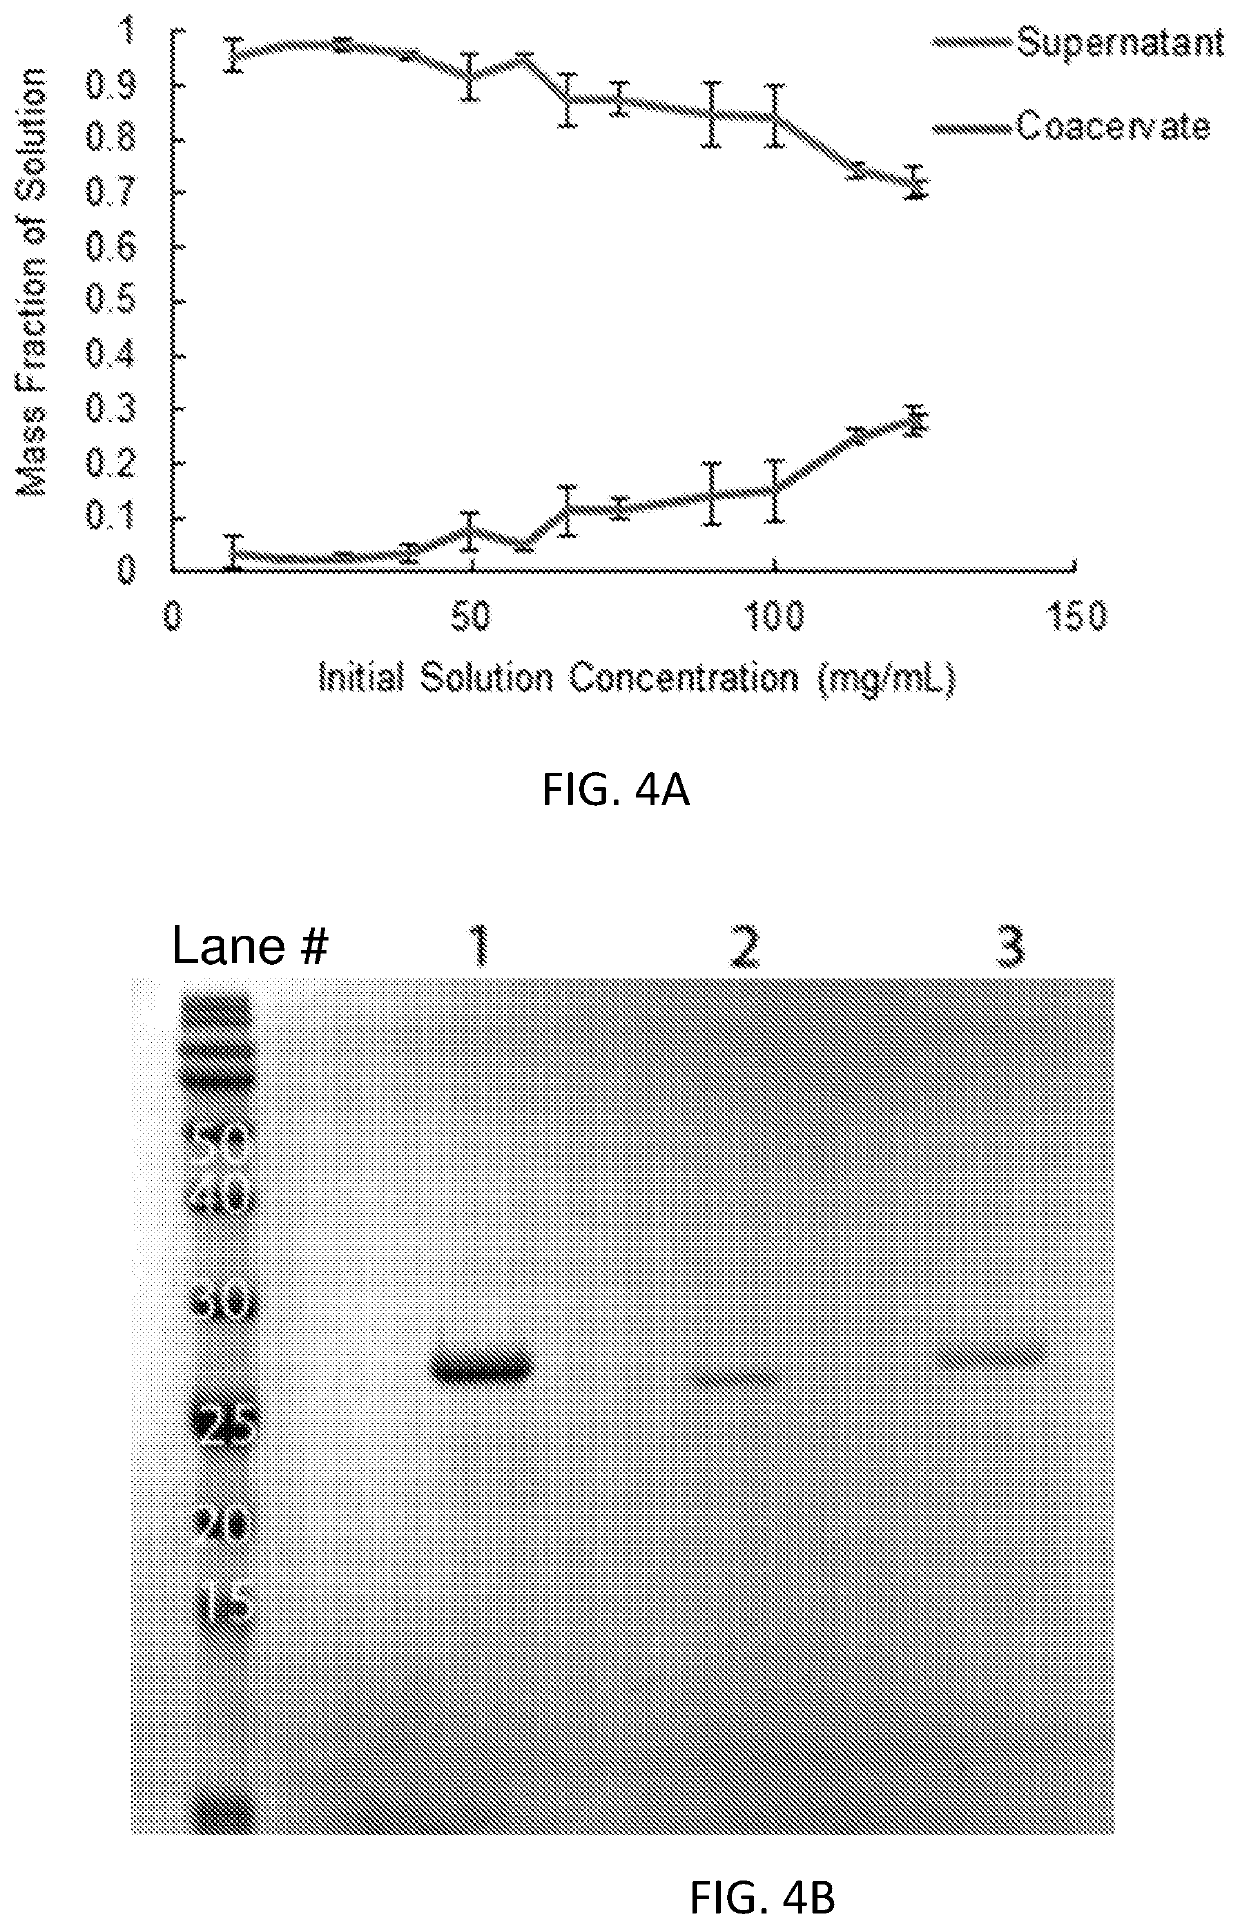 Protein-based adhesive and its modification